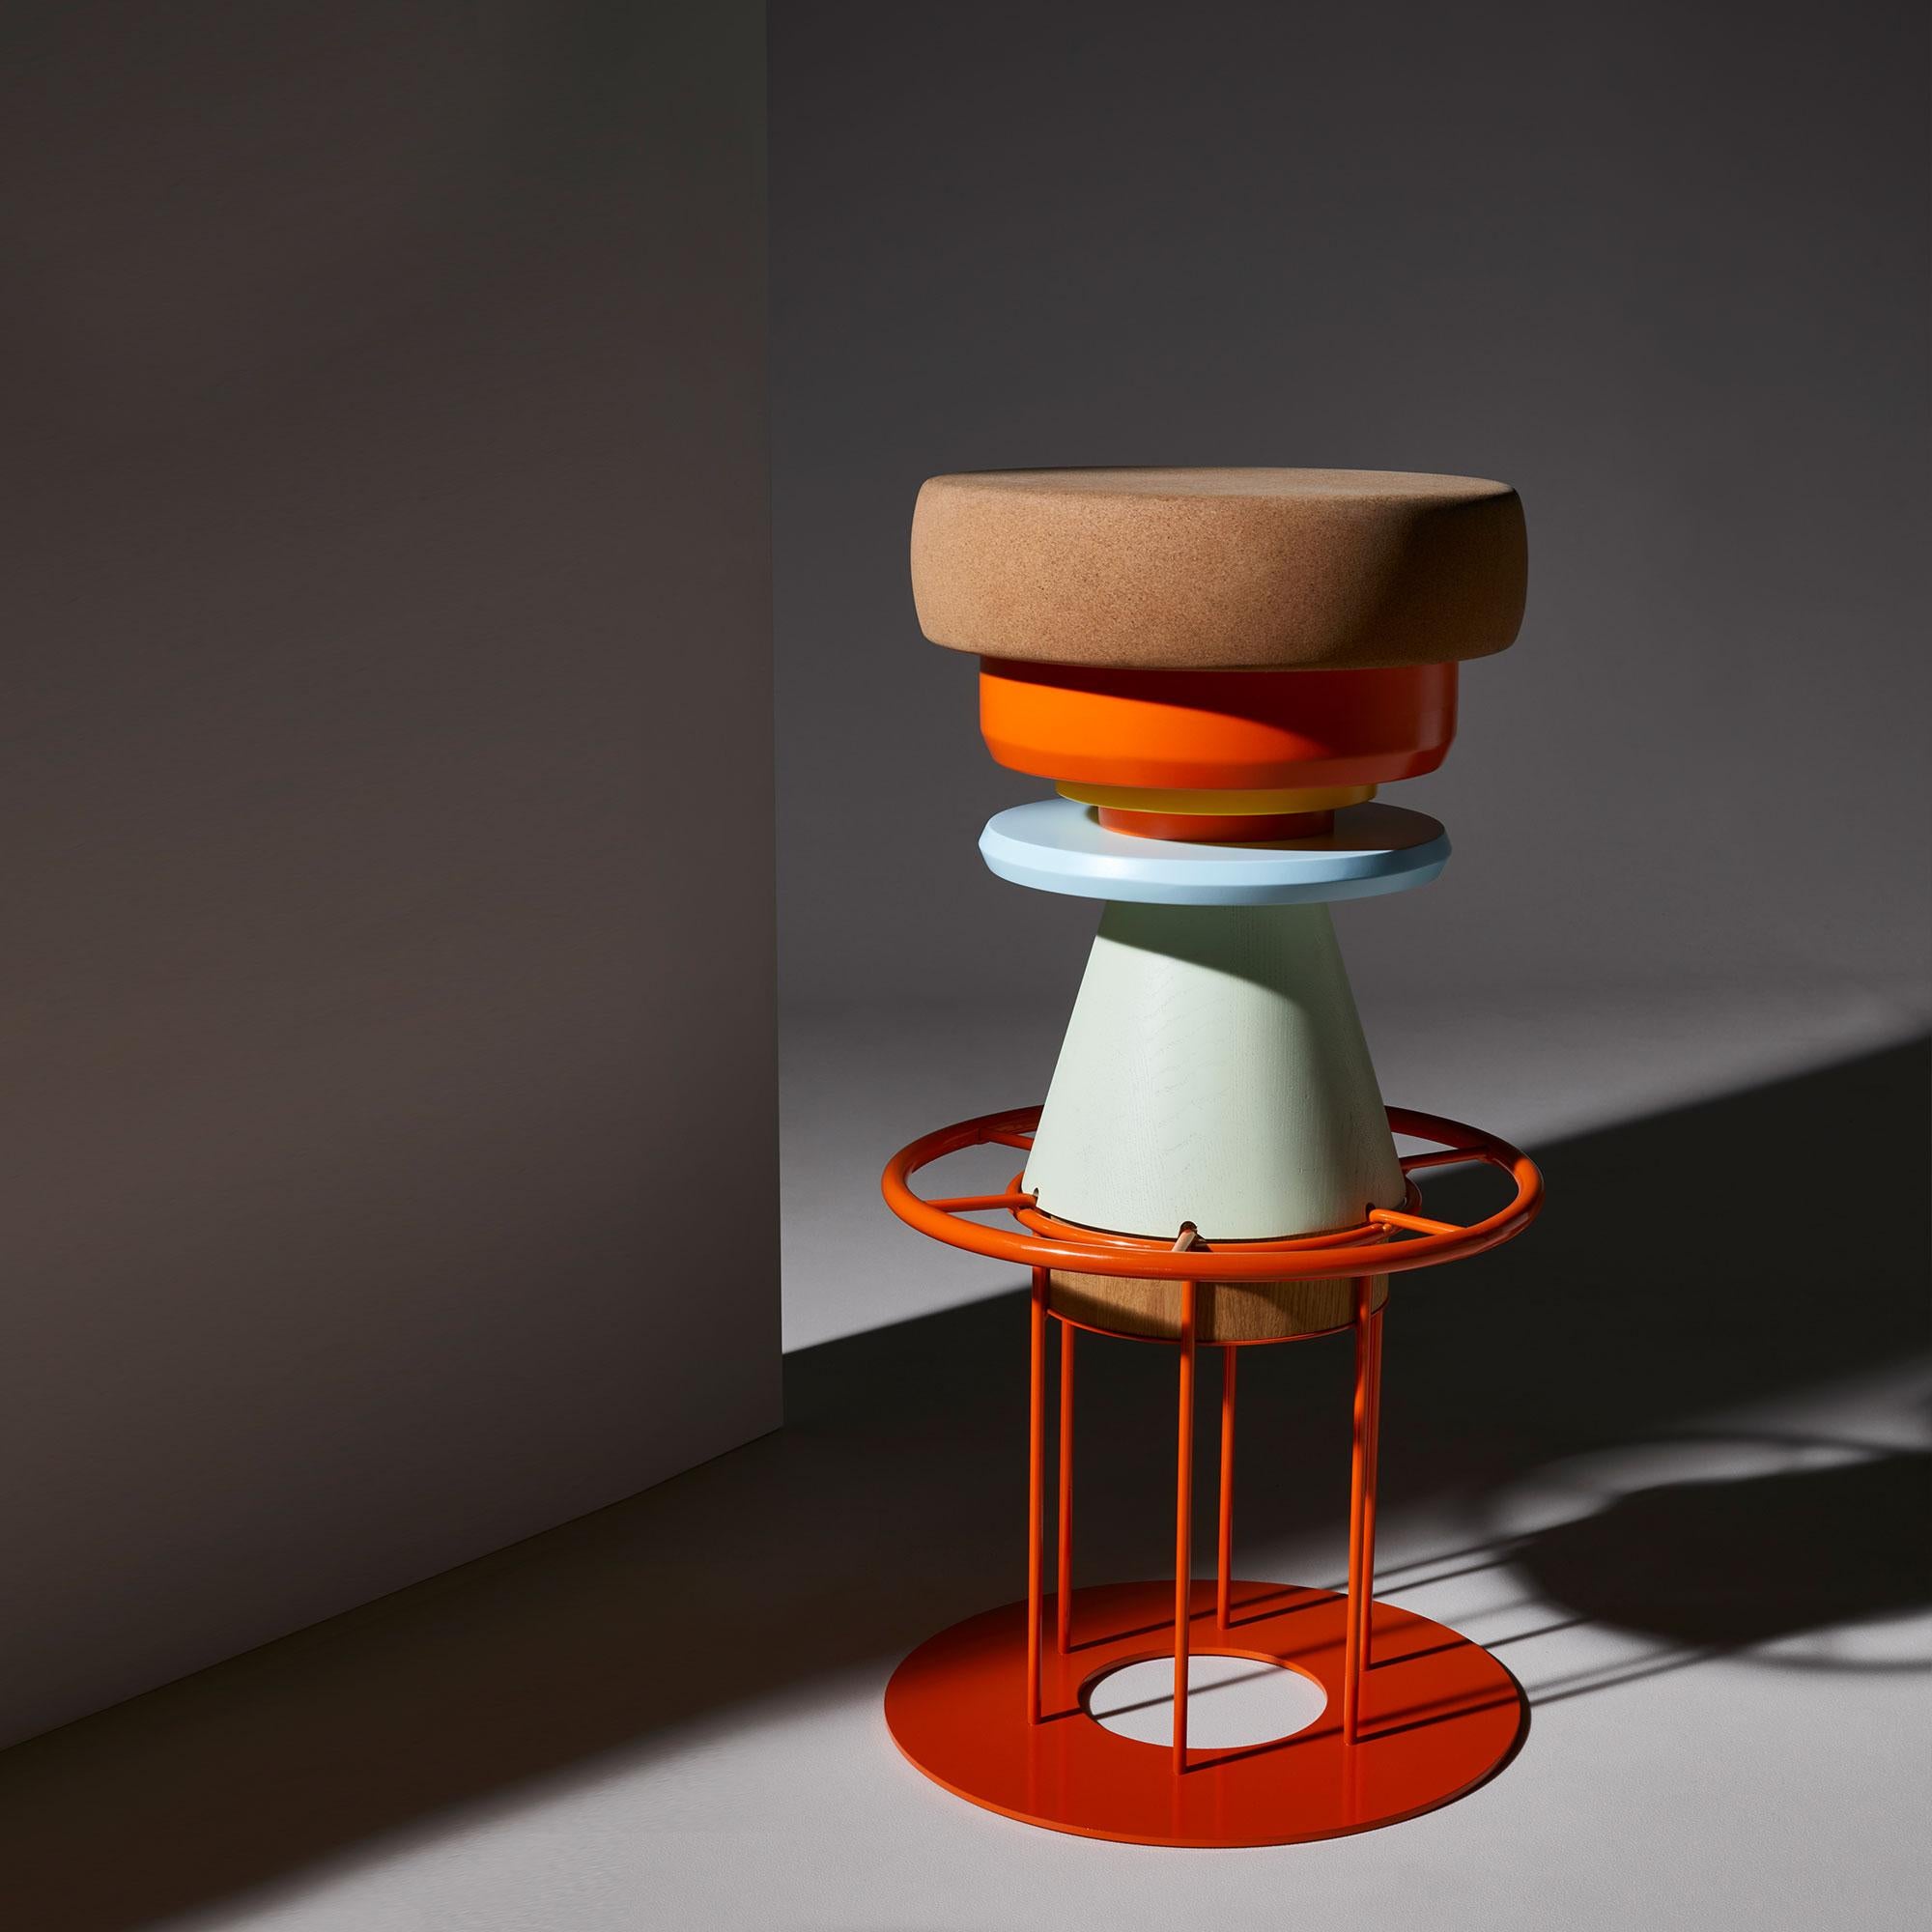 Set of 2 high colorful tembo stool - Note Design Studio.
Dimensions: D 36 x H 76 cm.
Materials: Lacquered steel structure, solid wood (beech) and lacquered MDF, natural cork base.
Available in black and 3 sizes: H46, H64, H76 cm.

Tembo is a